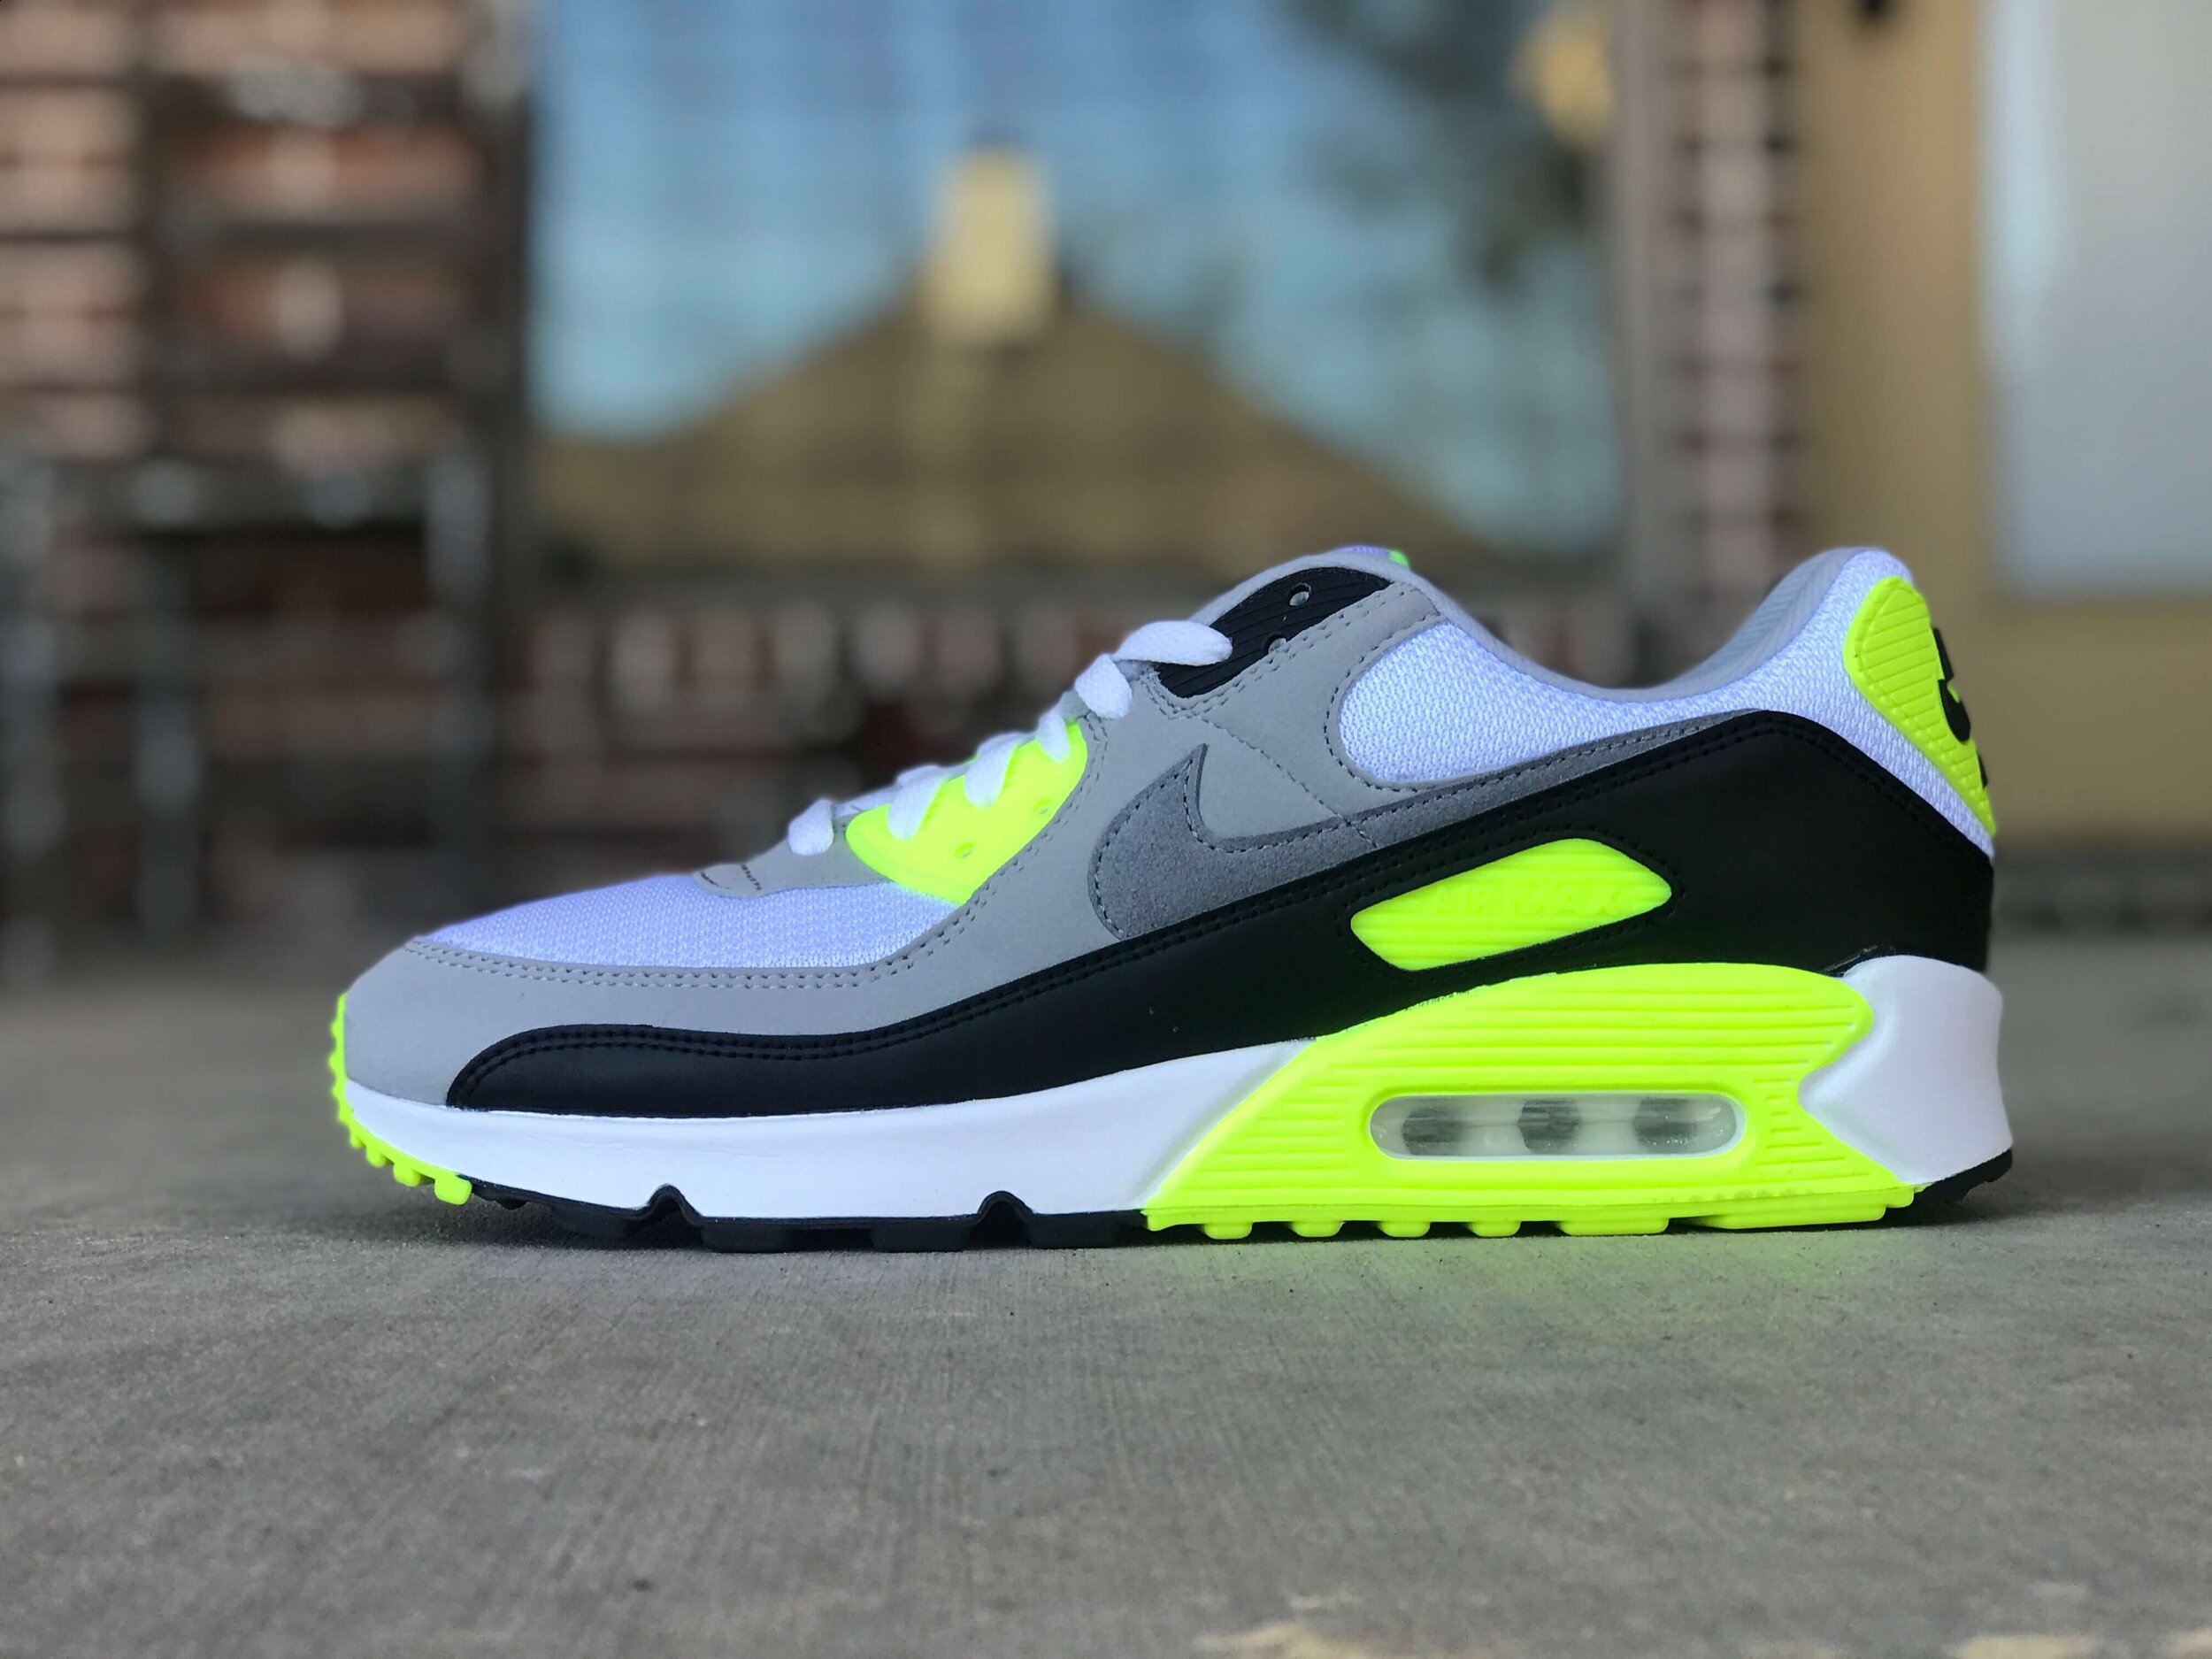 A Detailed Unboxing Of The 2020 Nike Air Max 90 